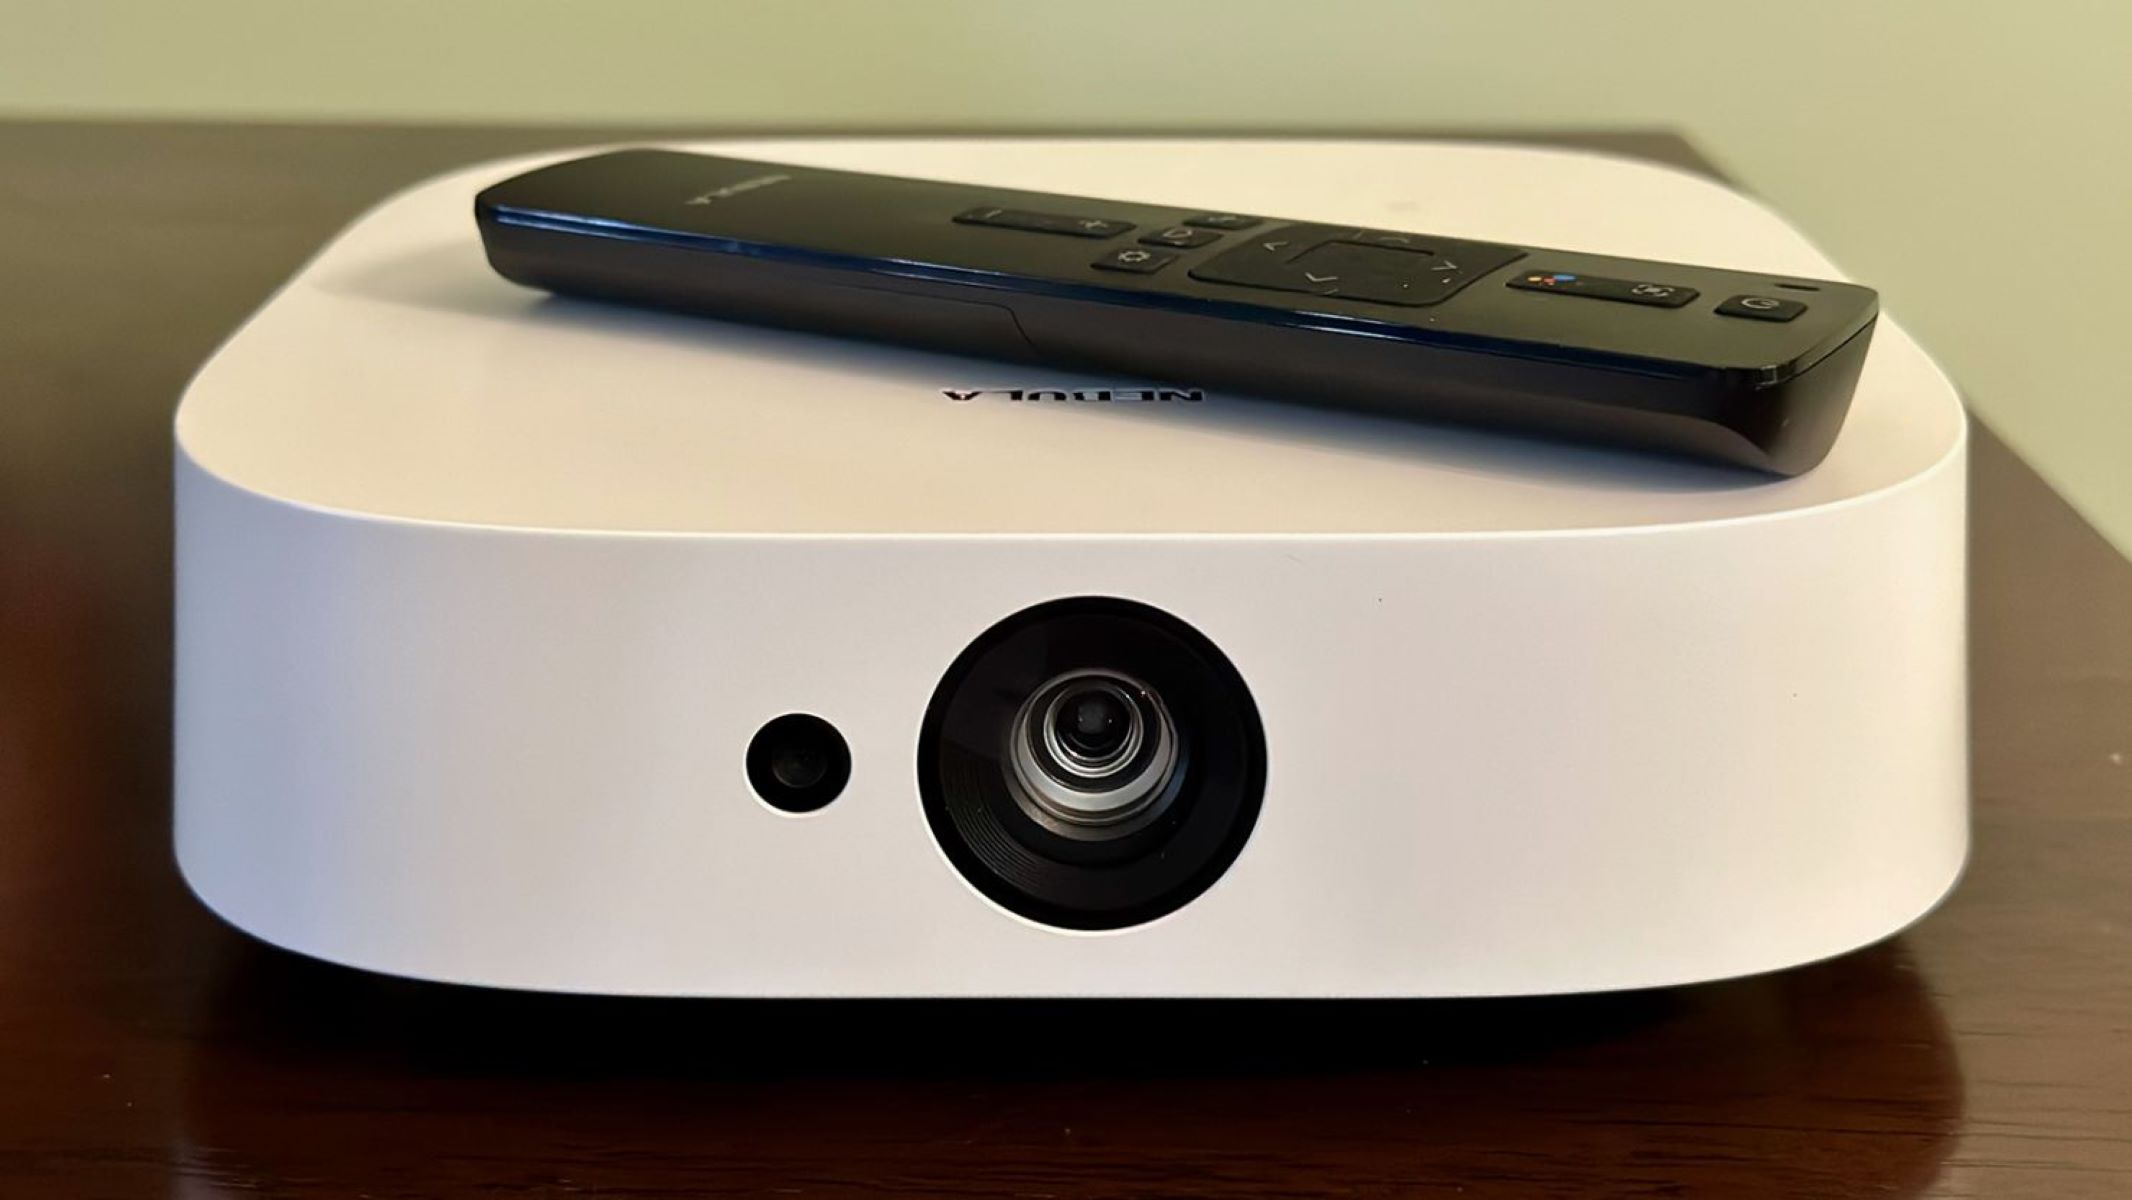 Connecting Your Phone To Nebula Projector: Step-by-Step Instructions